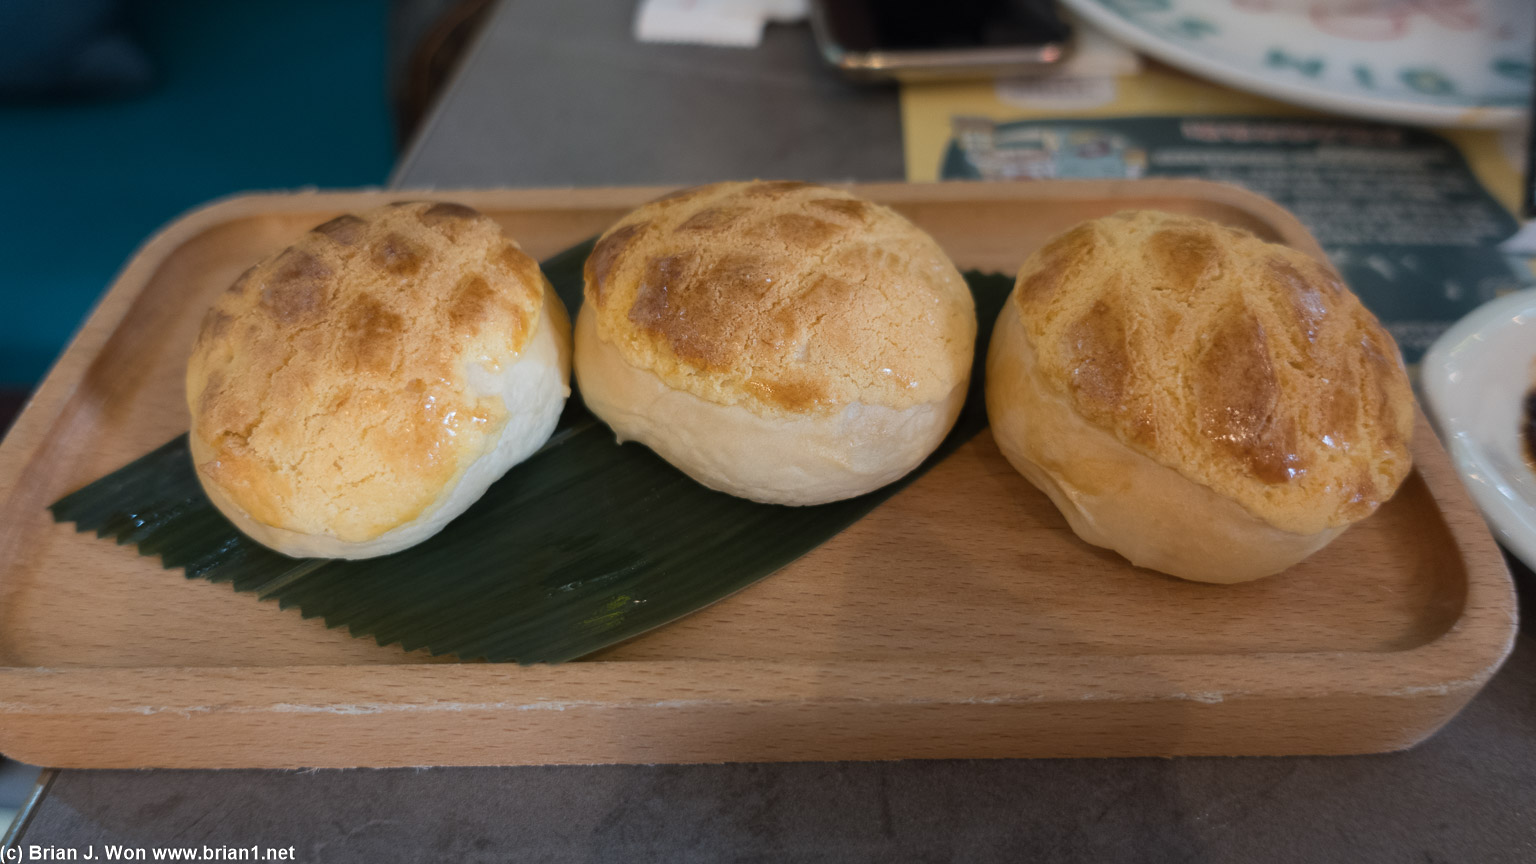 Cheese-filled pineapple buns were good, but I wasn't expecting cheese.